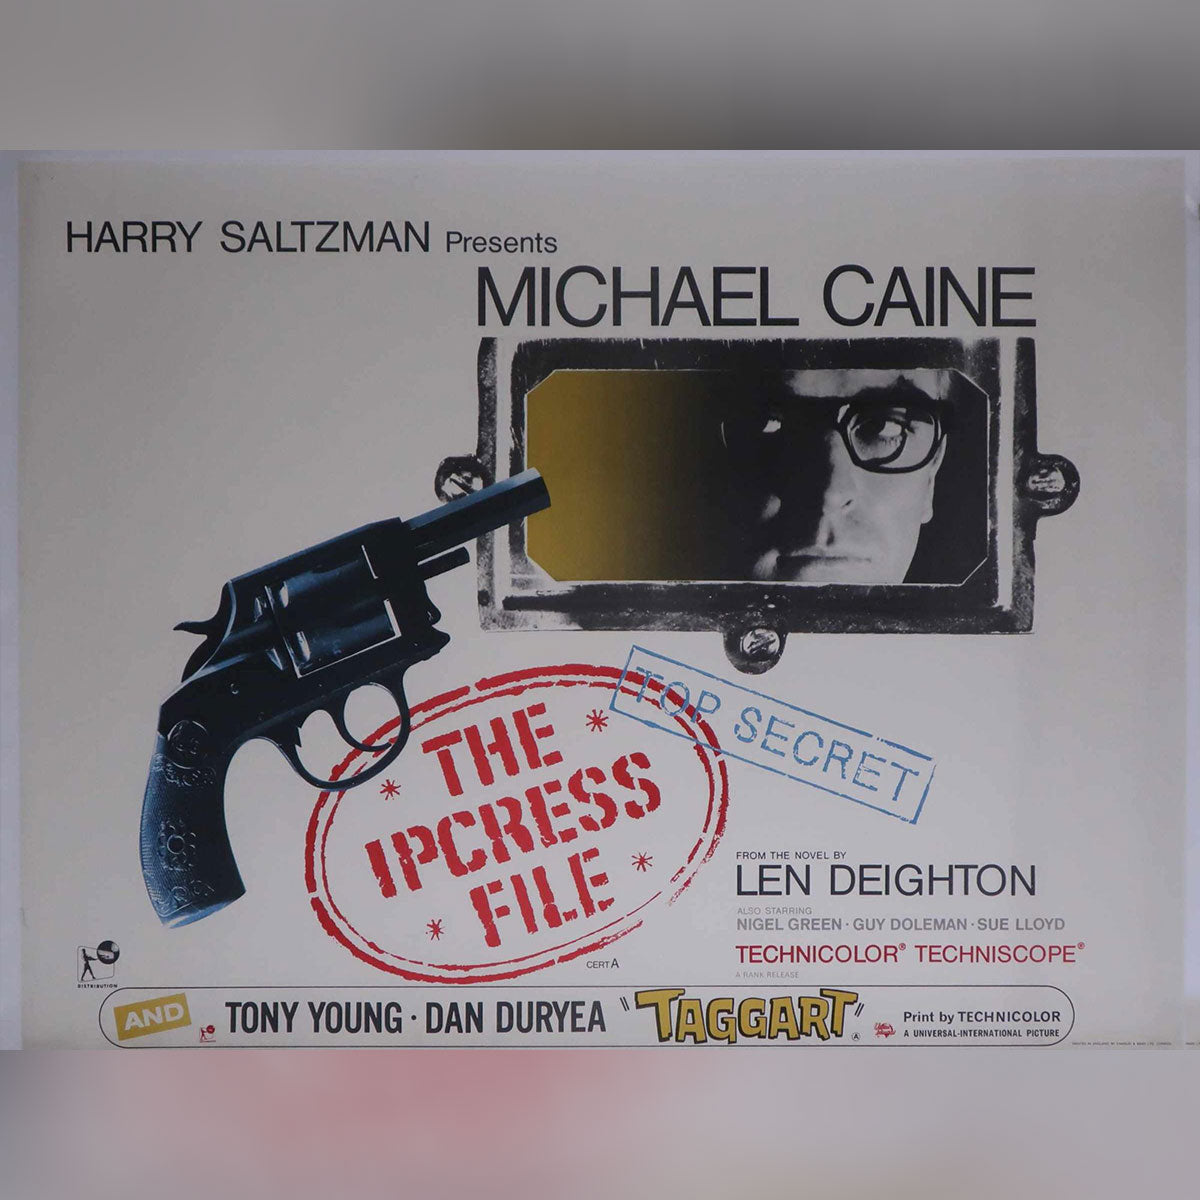 Ipcress File, The (1965)